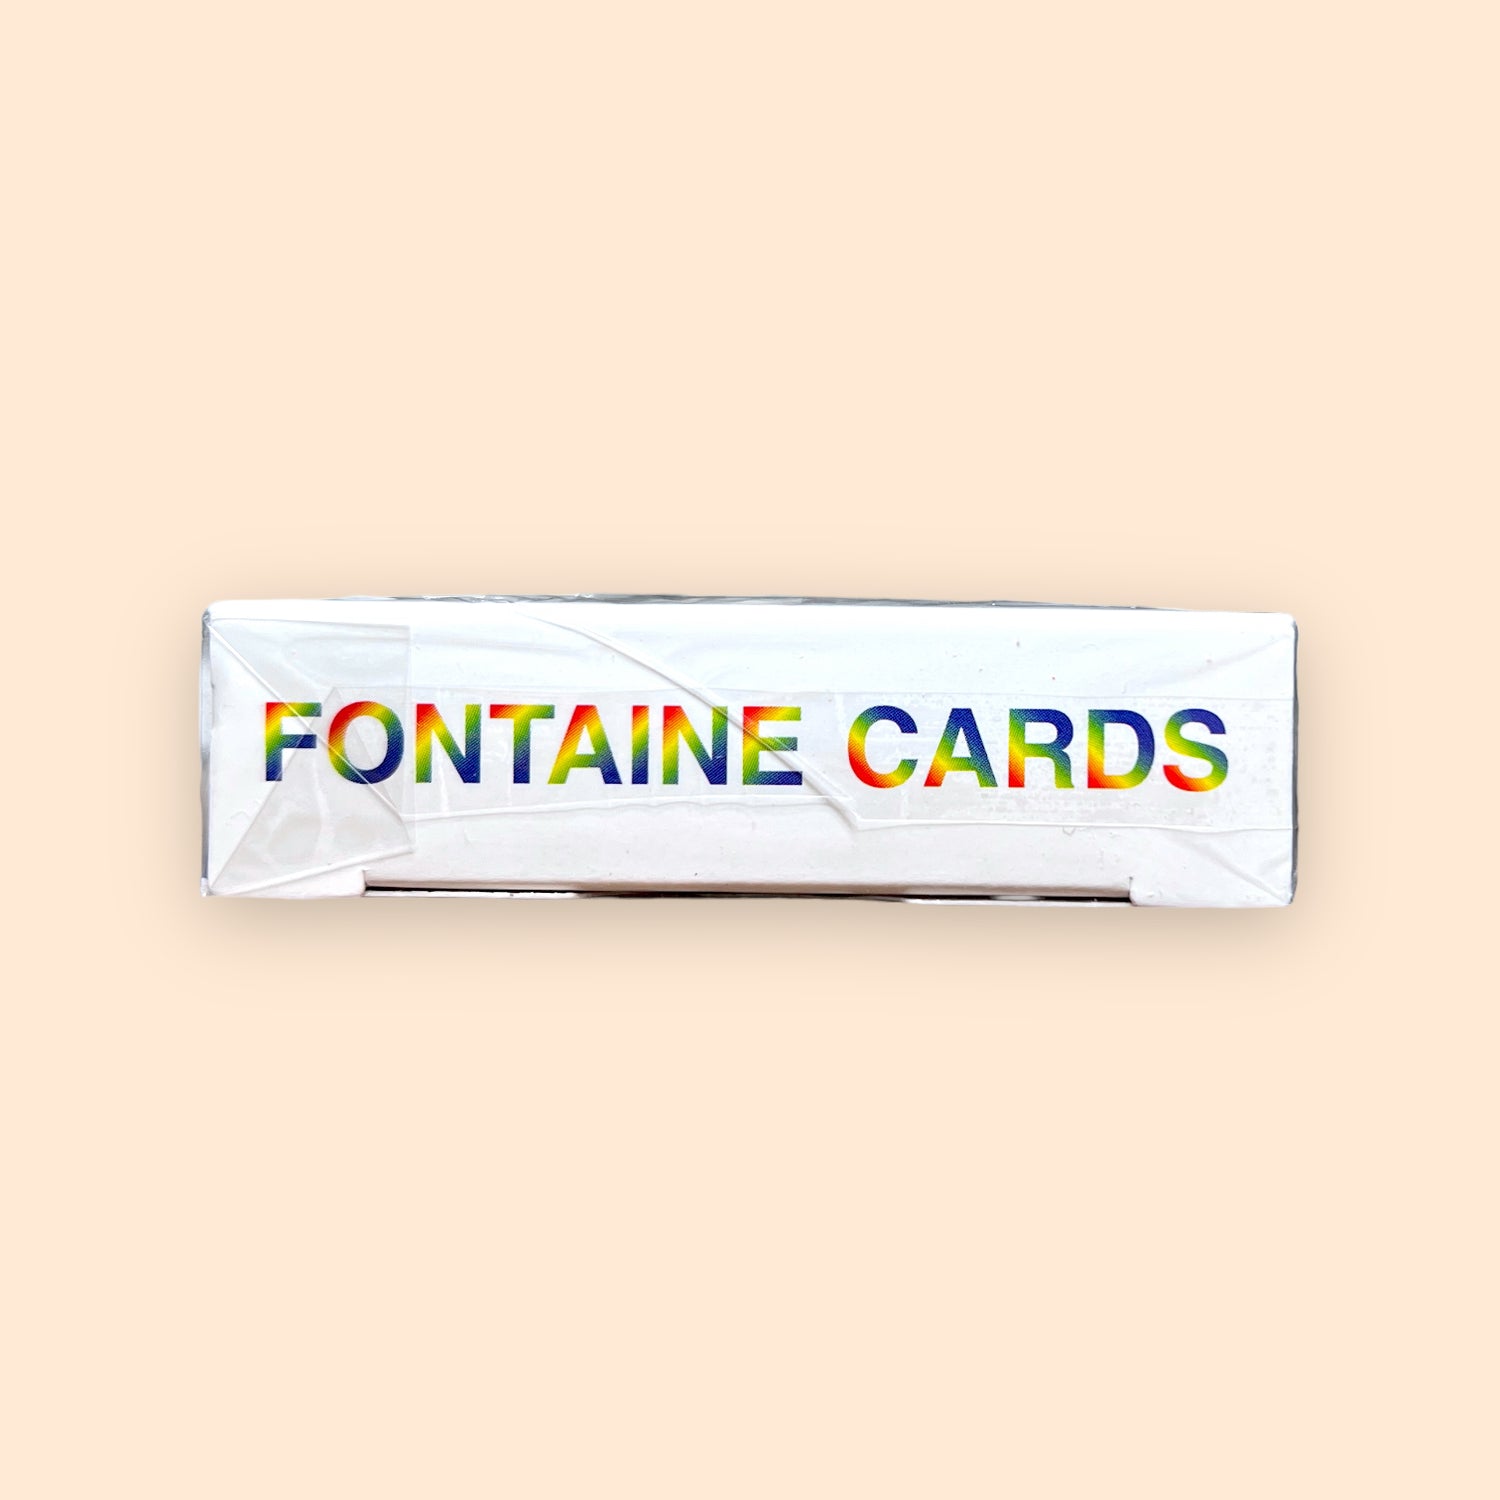 Fontaine 5000S Heat Vision 1 of 400 playing cards